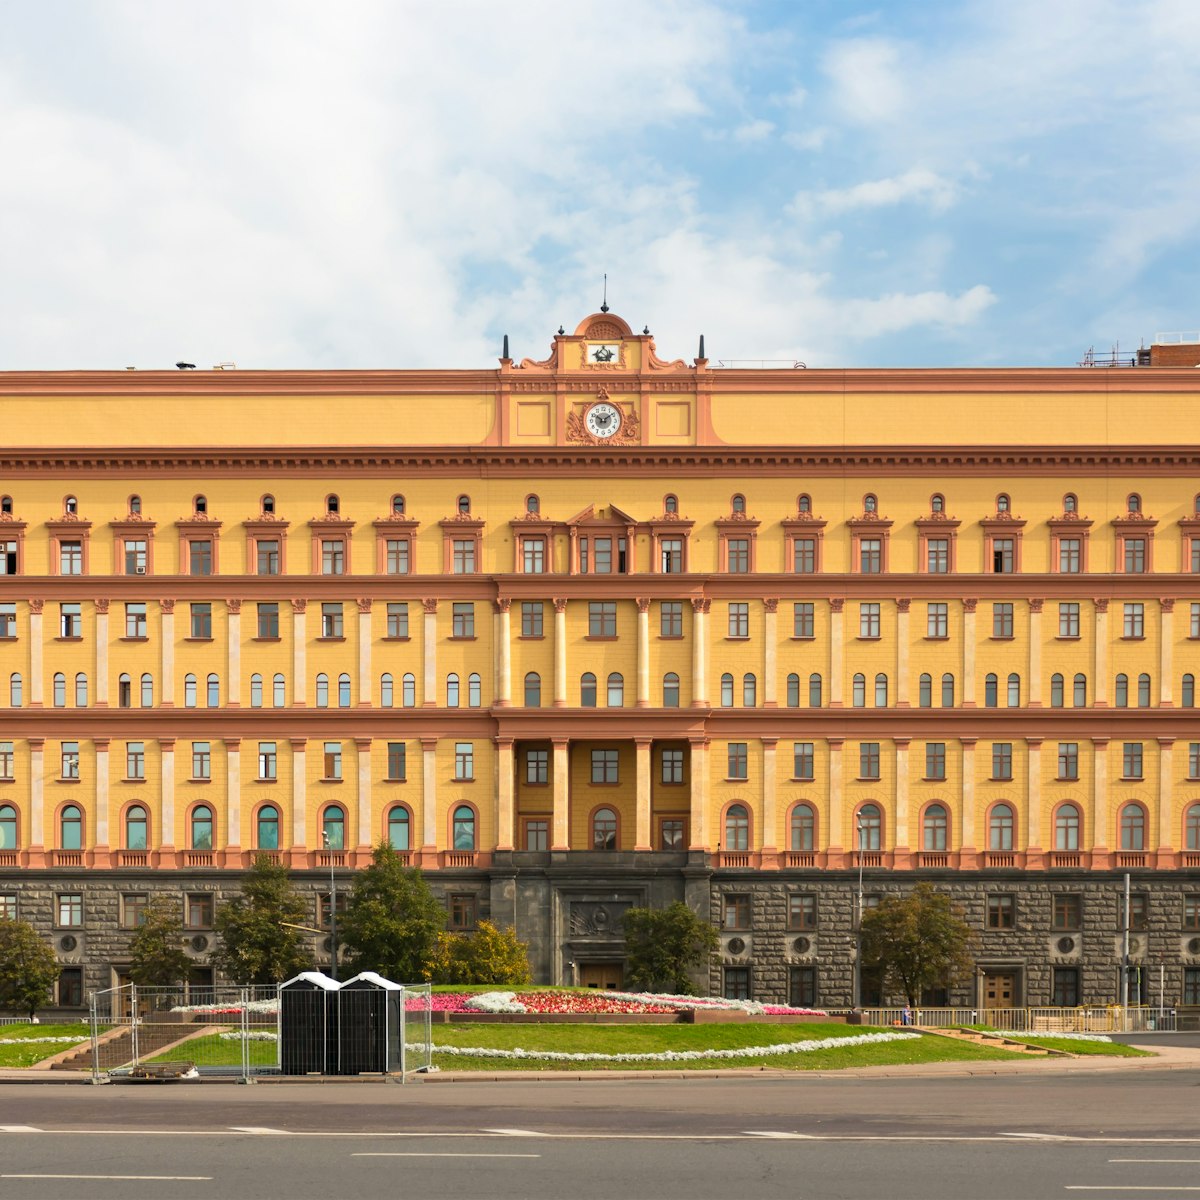 The Lubyanka Building, the headquarters of the FSB (former KGB) on Lubyanka Square in Moscow, Russia.